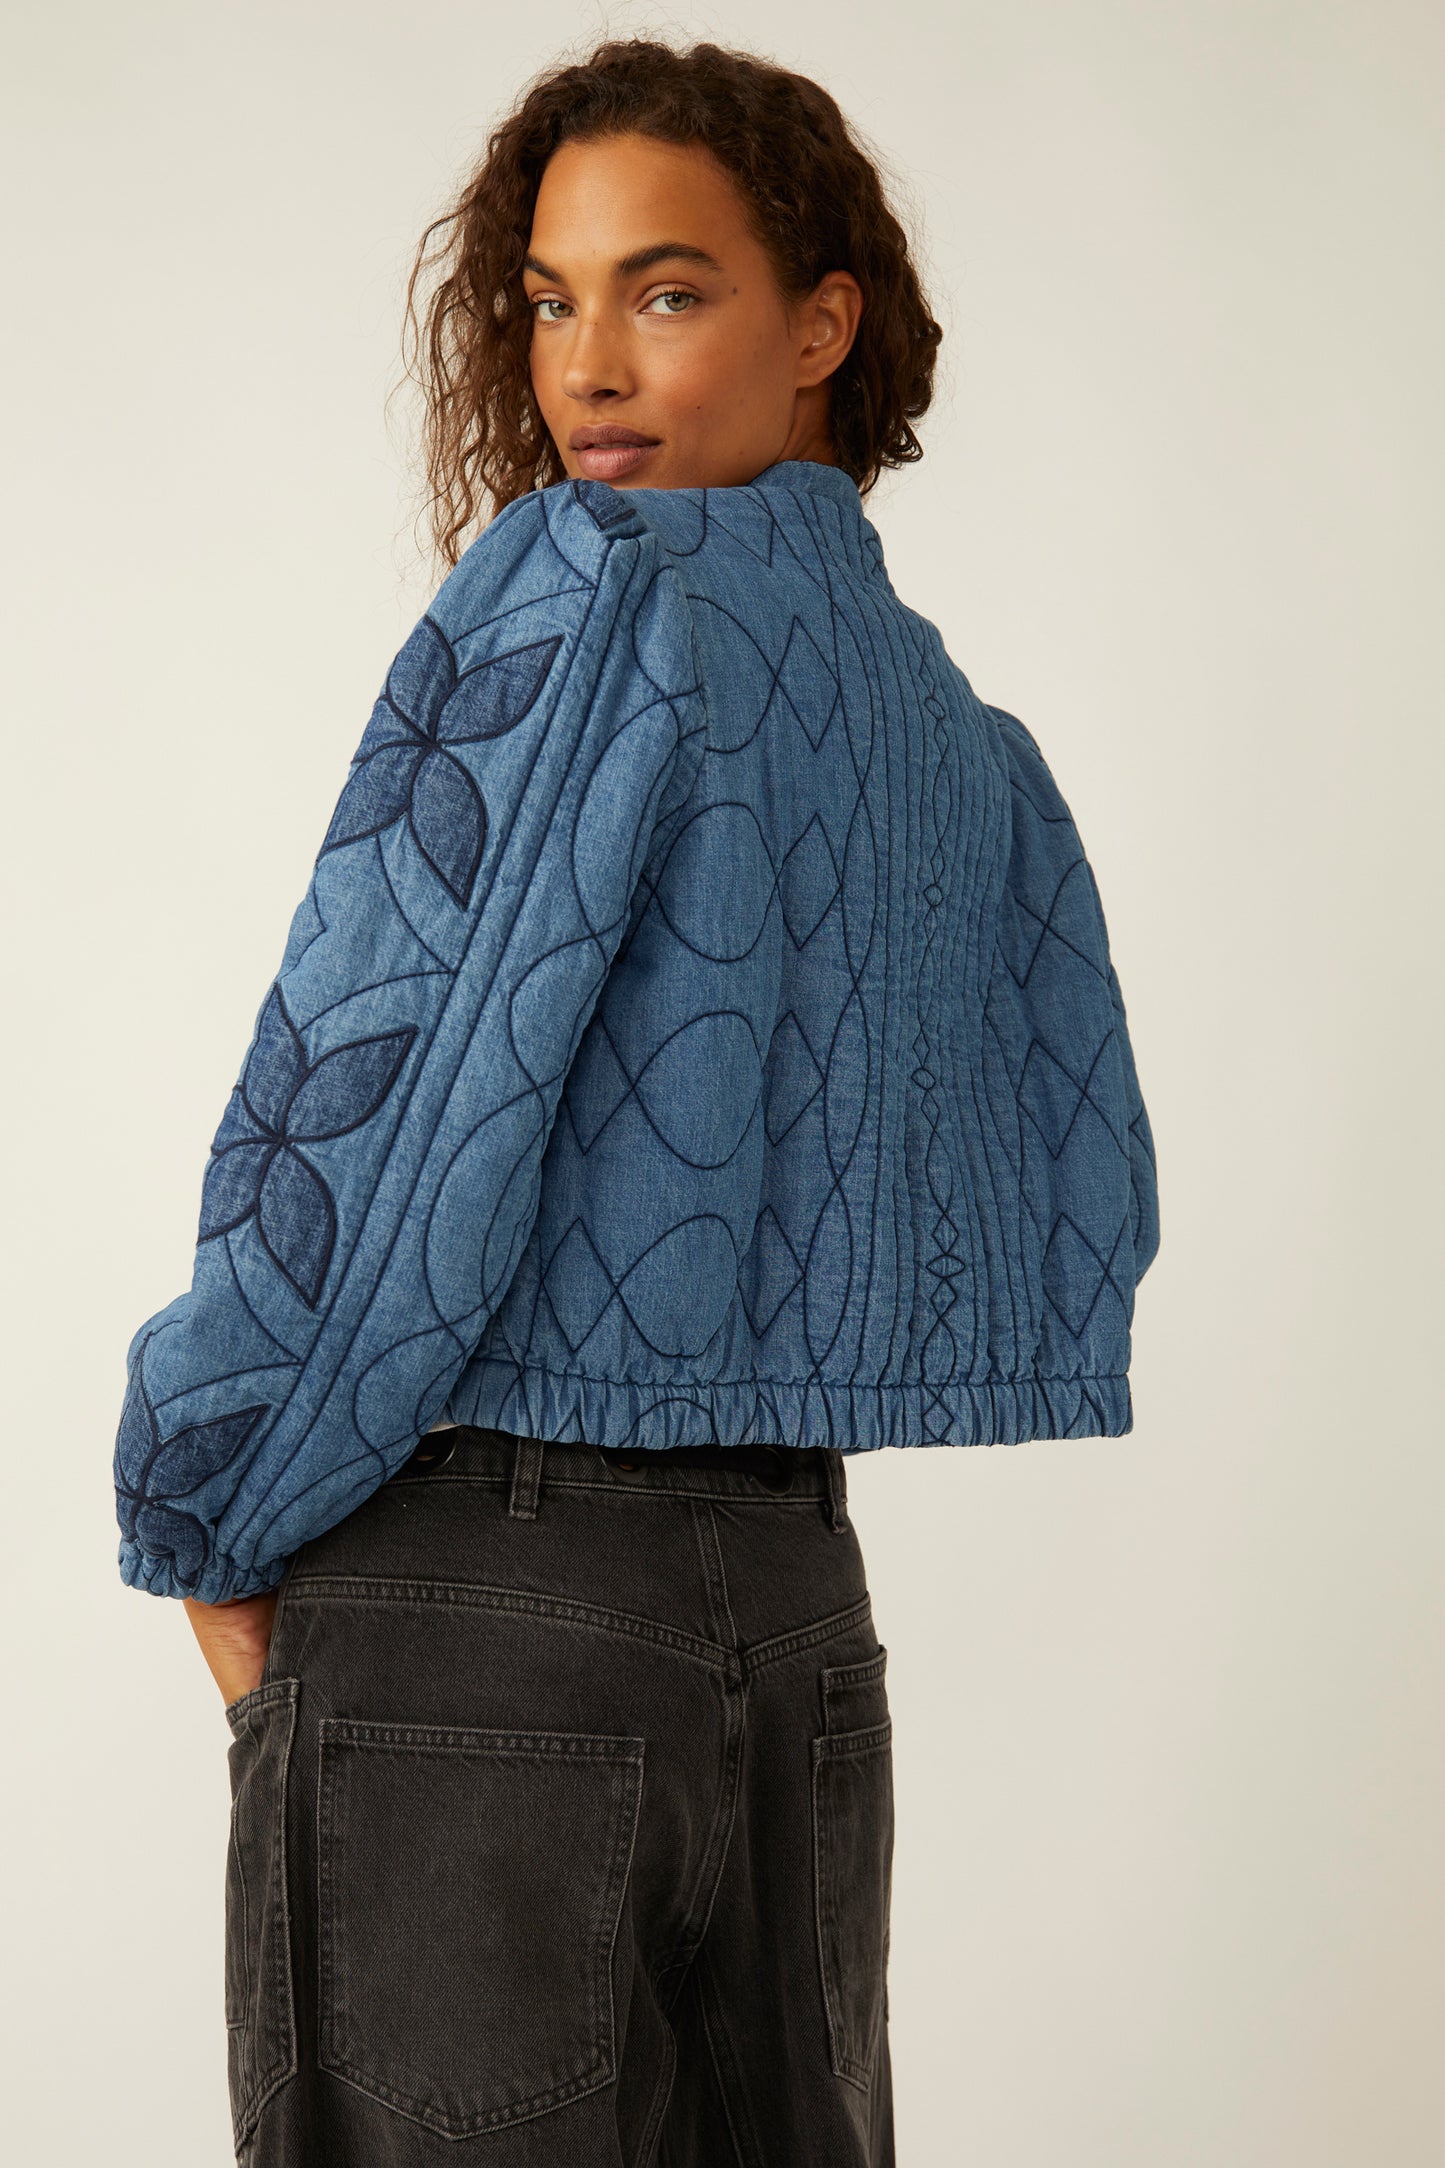 Free People Quinn Quilted Jacket - Indigo Combo